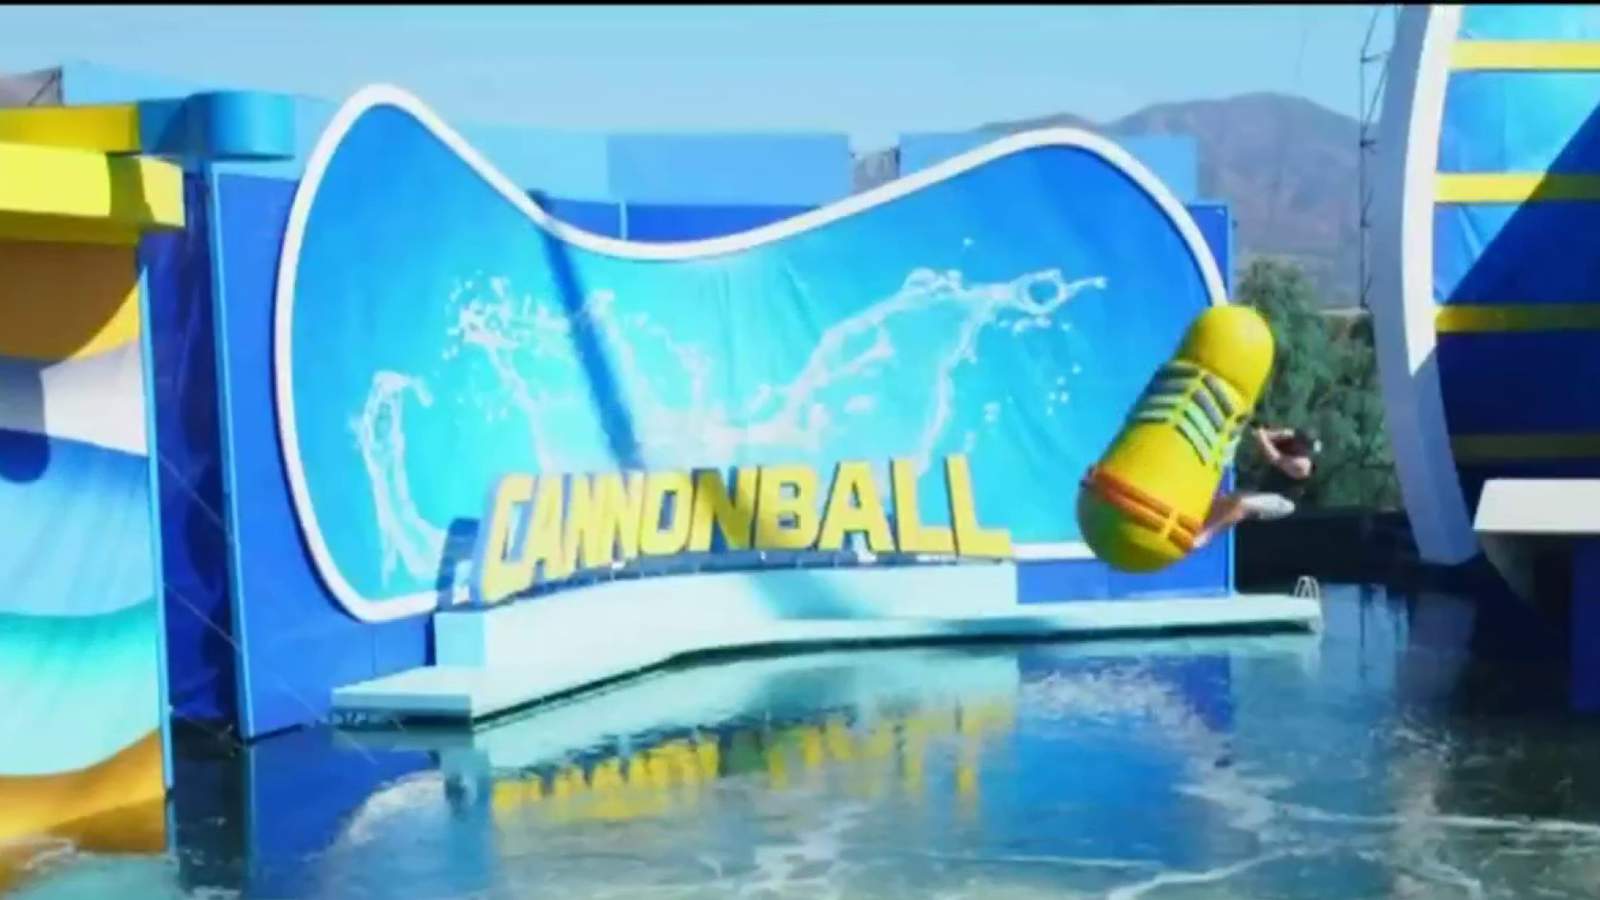 Making a splash on Cannonball'